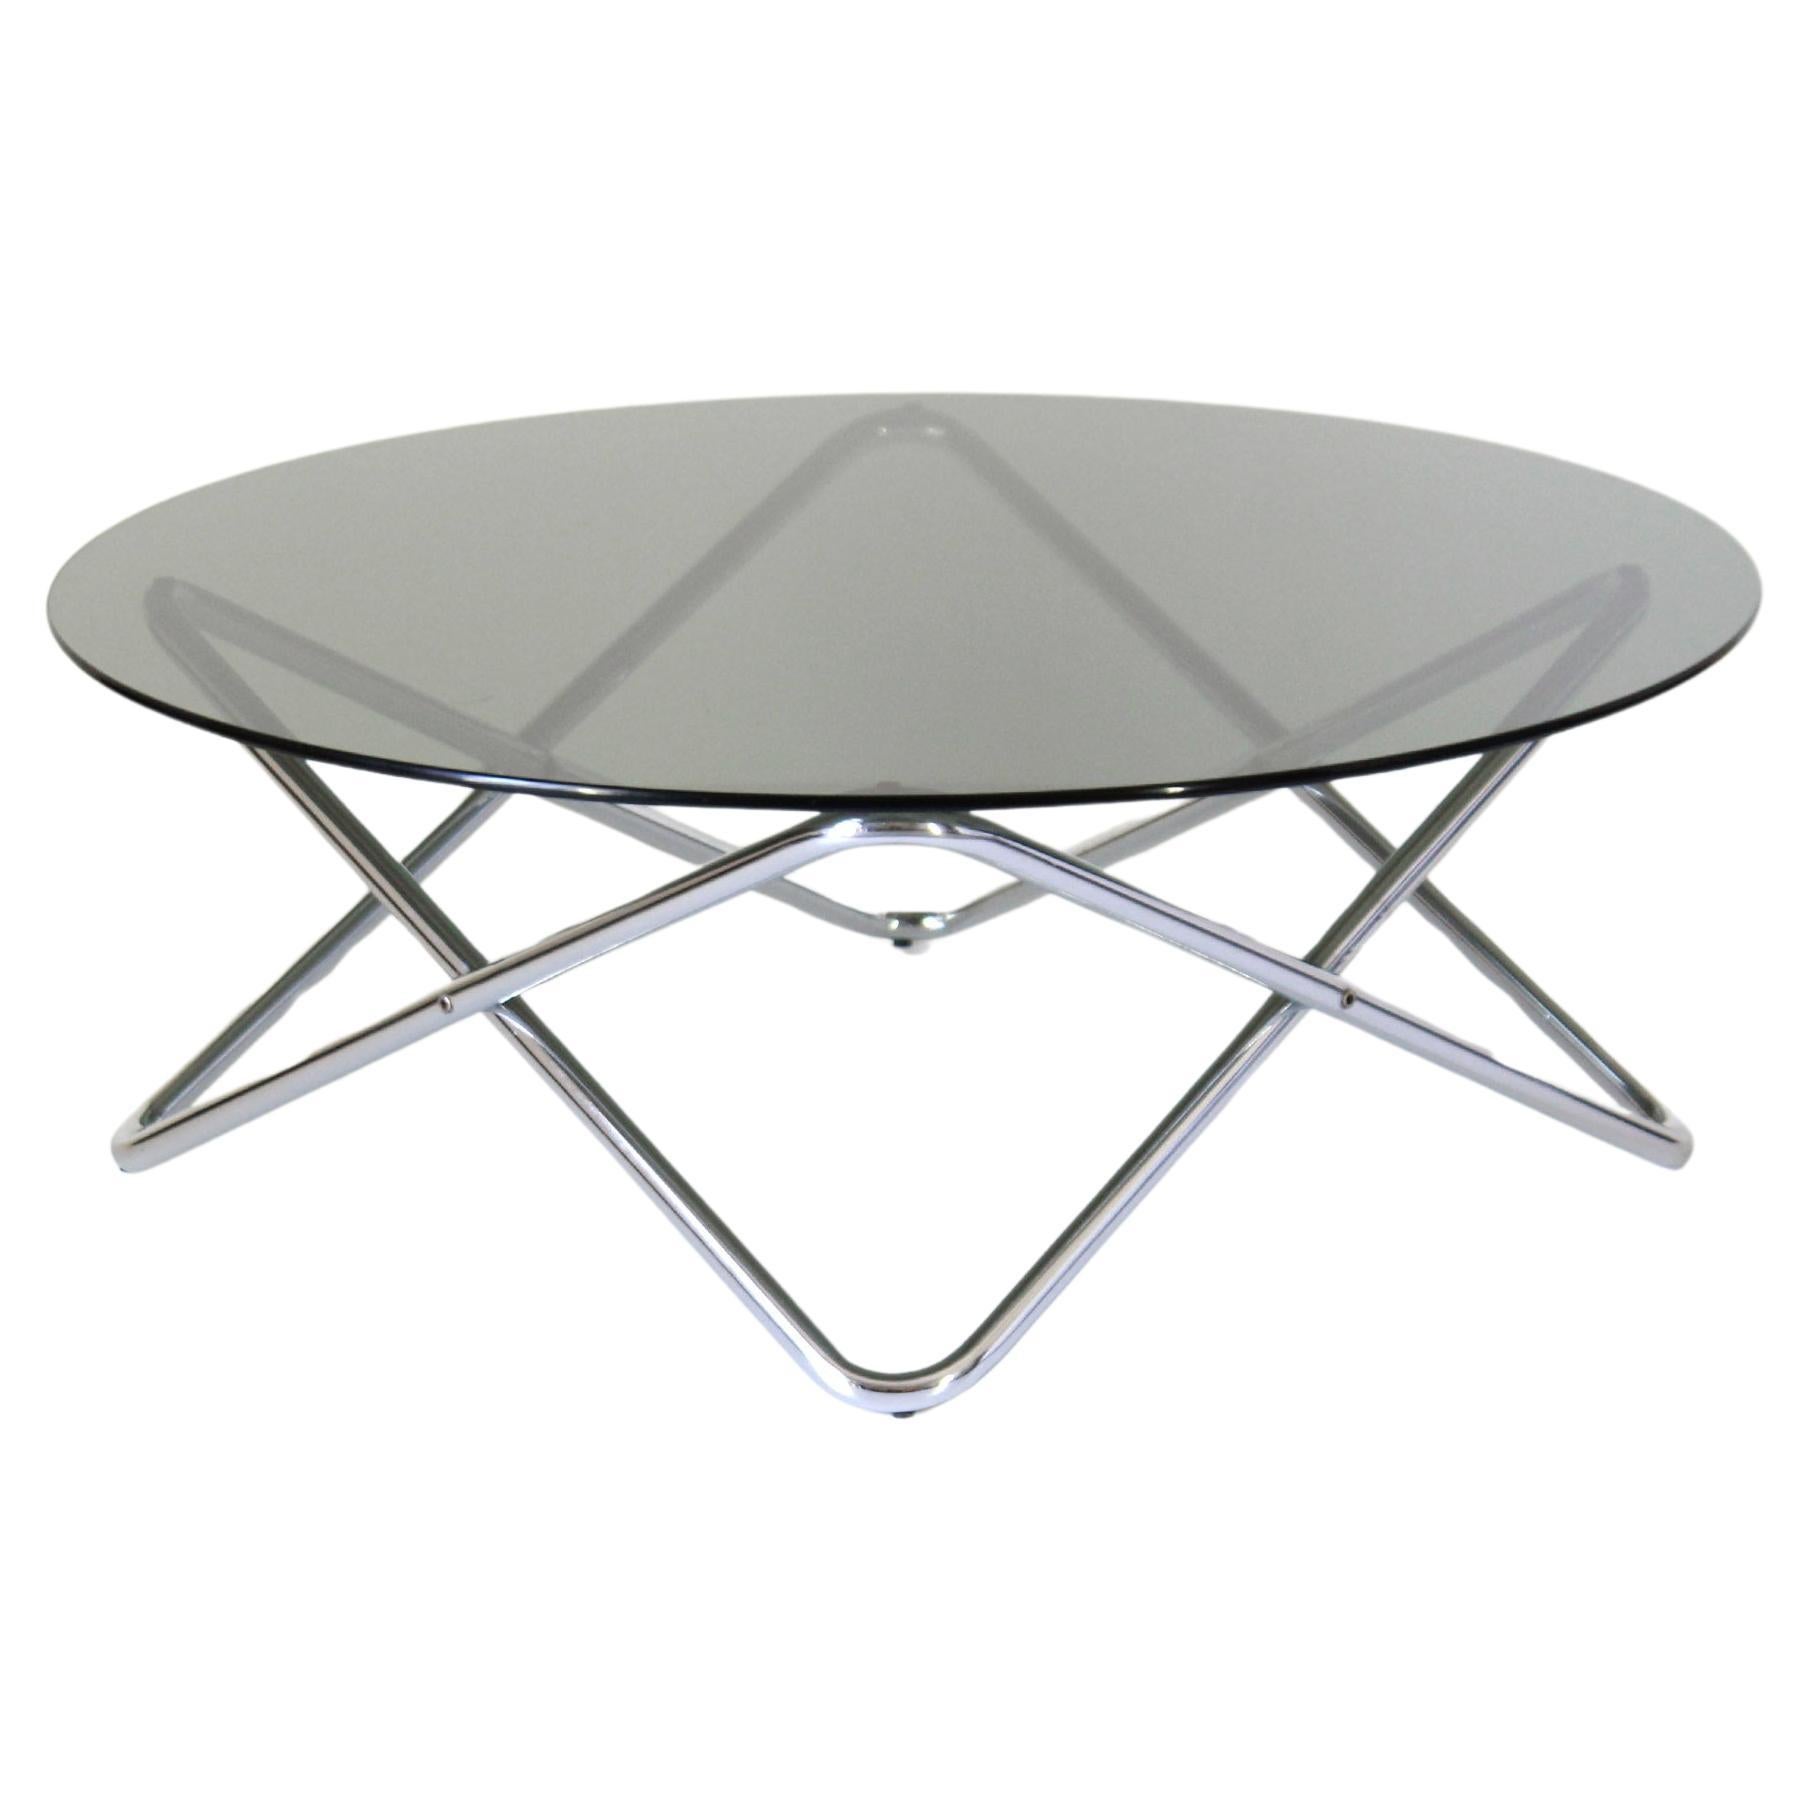 Vintage chromed Coffee Table with Smoked glass Top, space age style, Italy 1970s
A 1970s vintage round coffee table with chromed structure and smoked black top. Typical space age style in refined italian manufacture.
The chromed structure has been